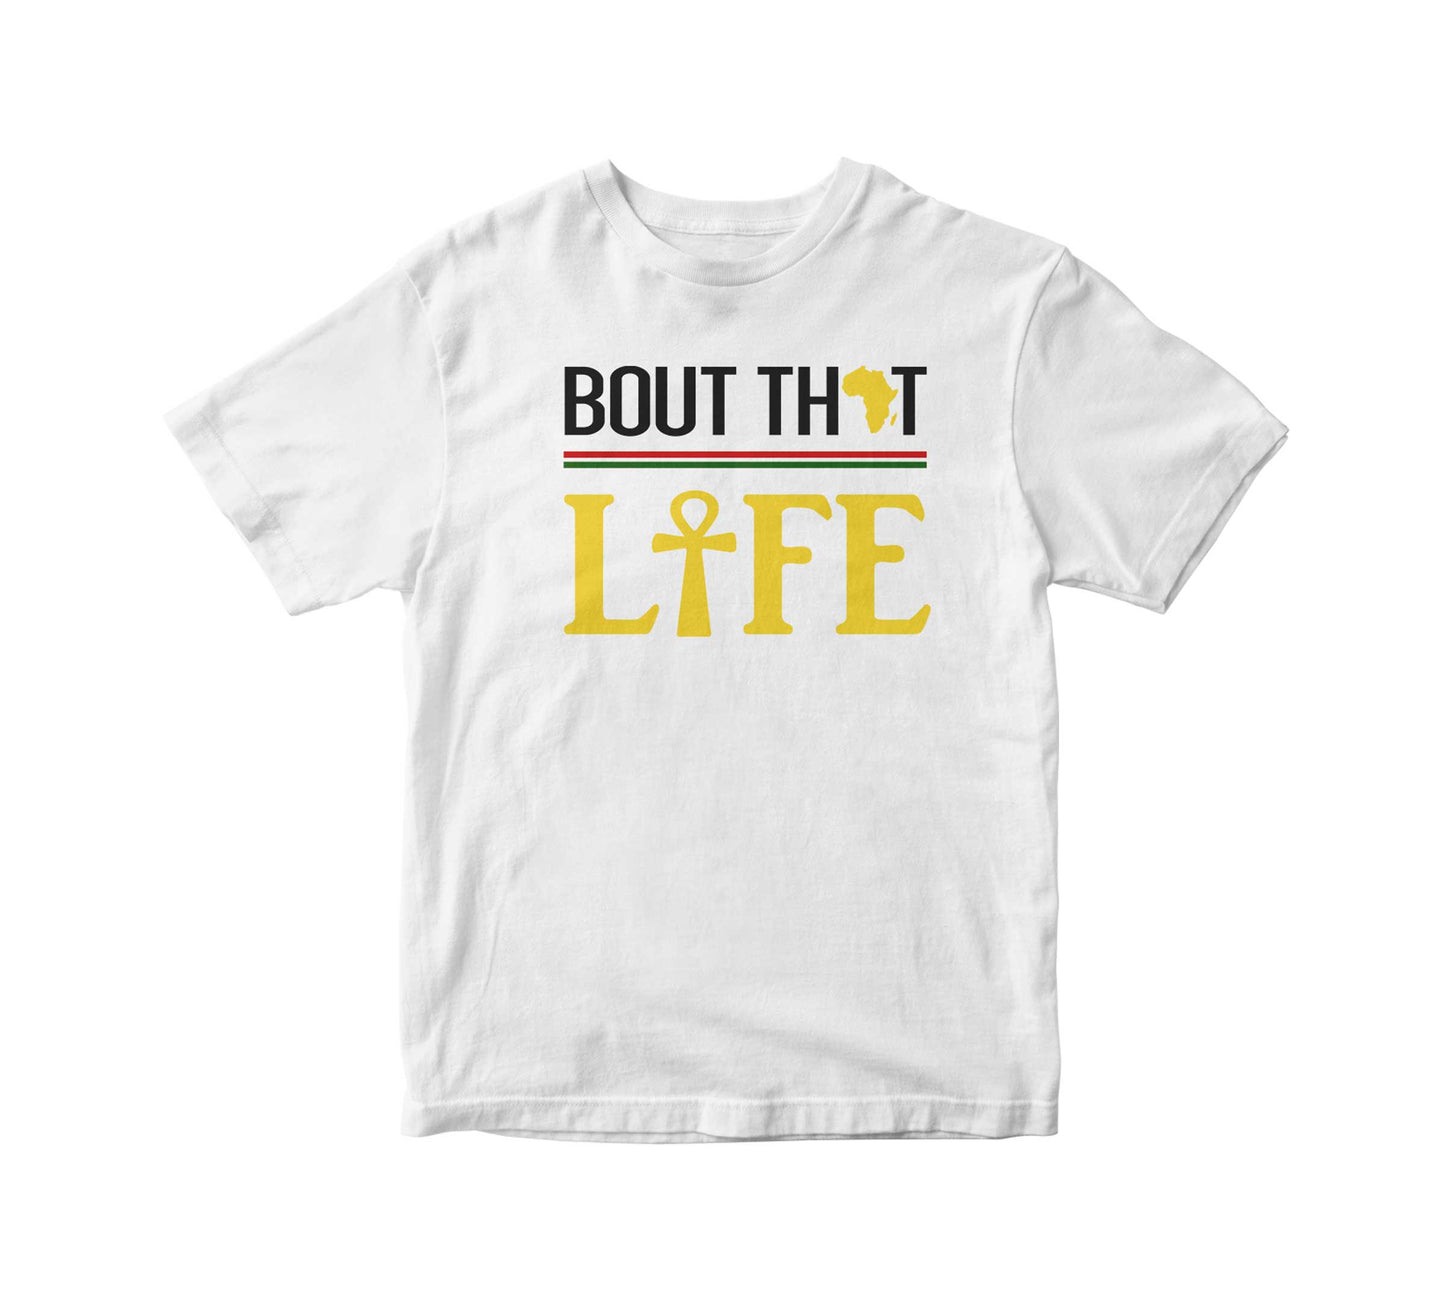 Bout That Life! Adult Unisex T-Shirt